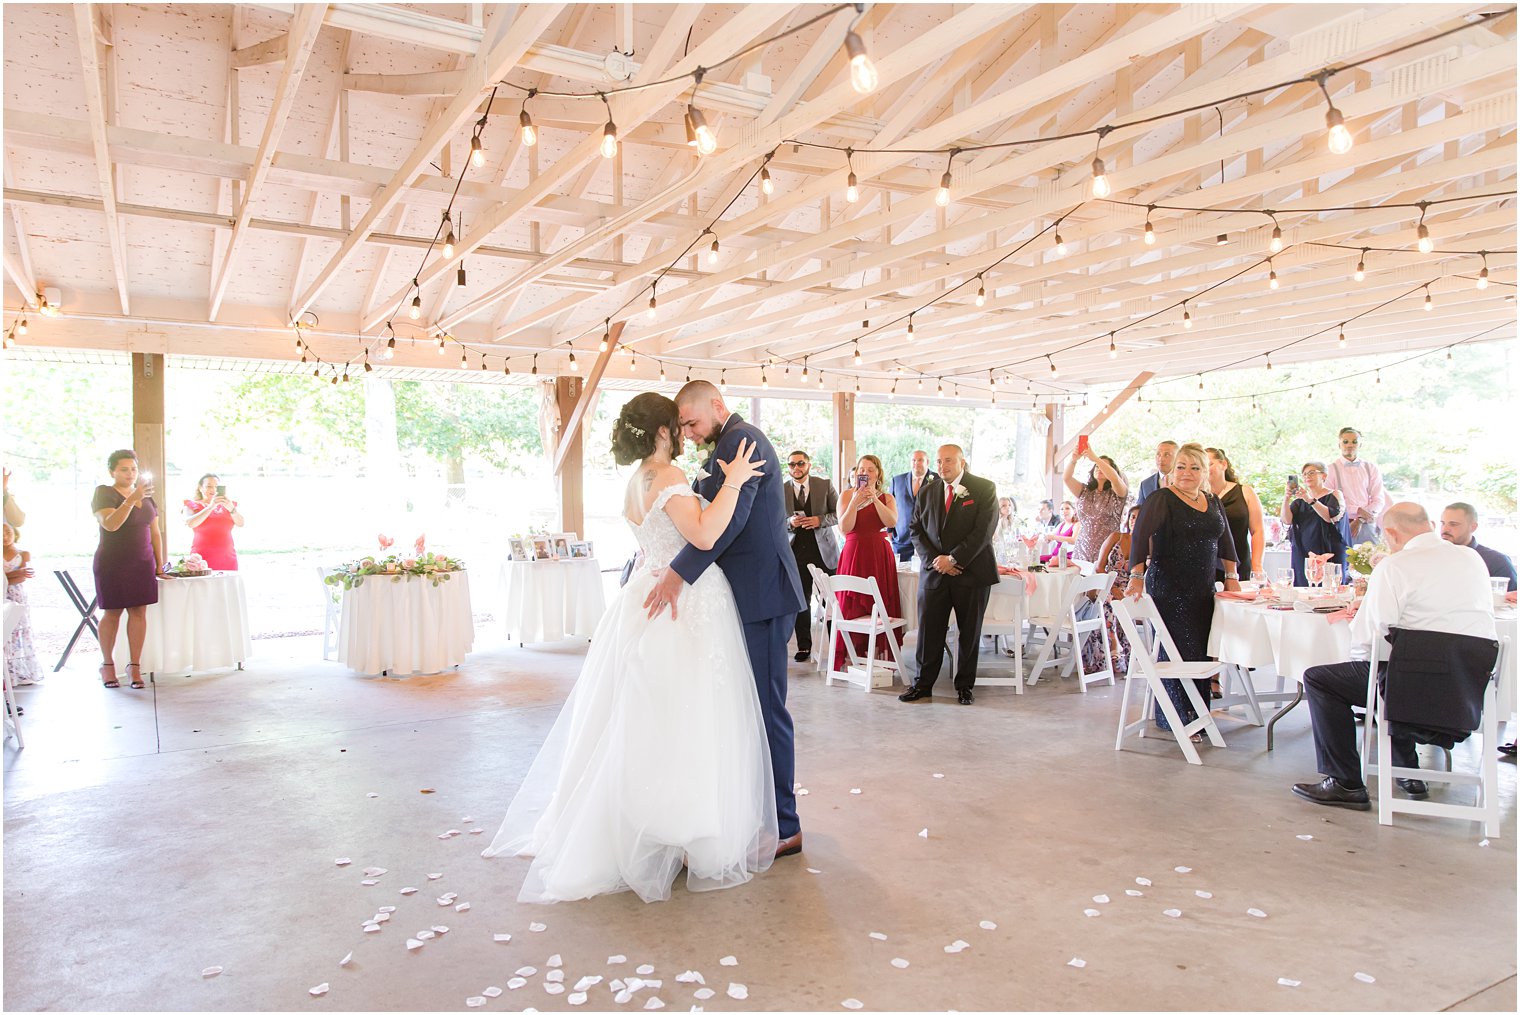 newlyweds dance together in pavilion at Rutgers Gardens